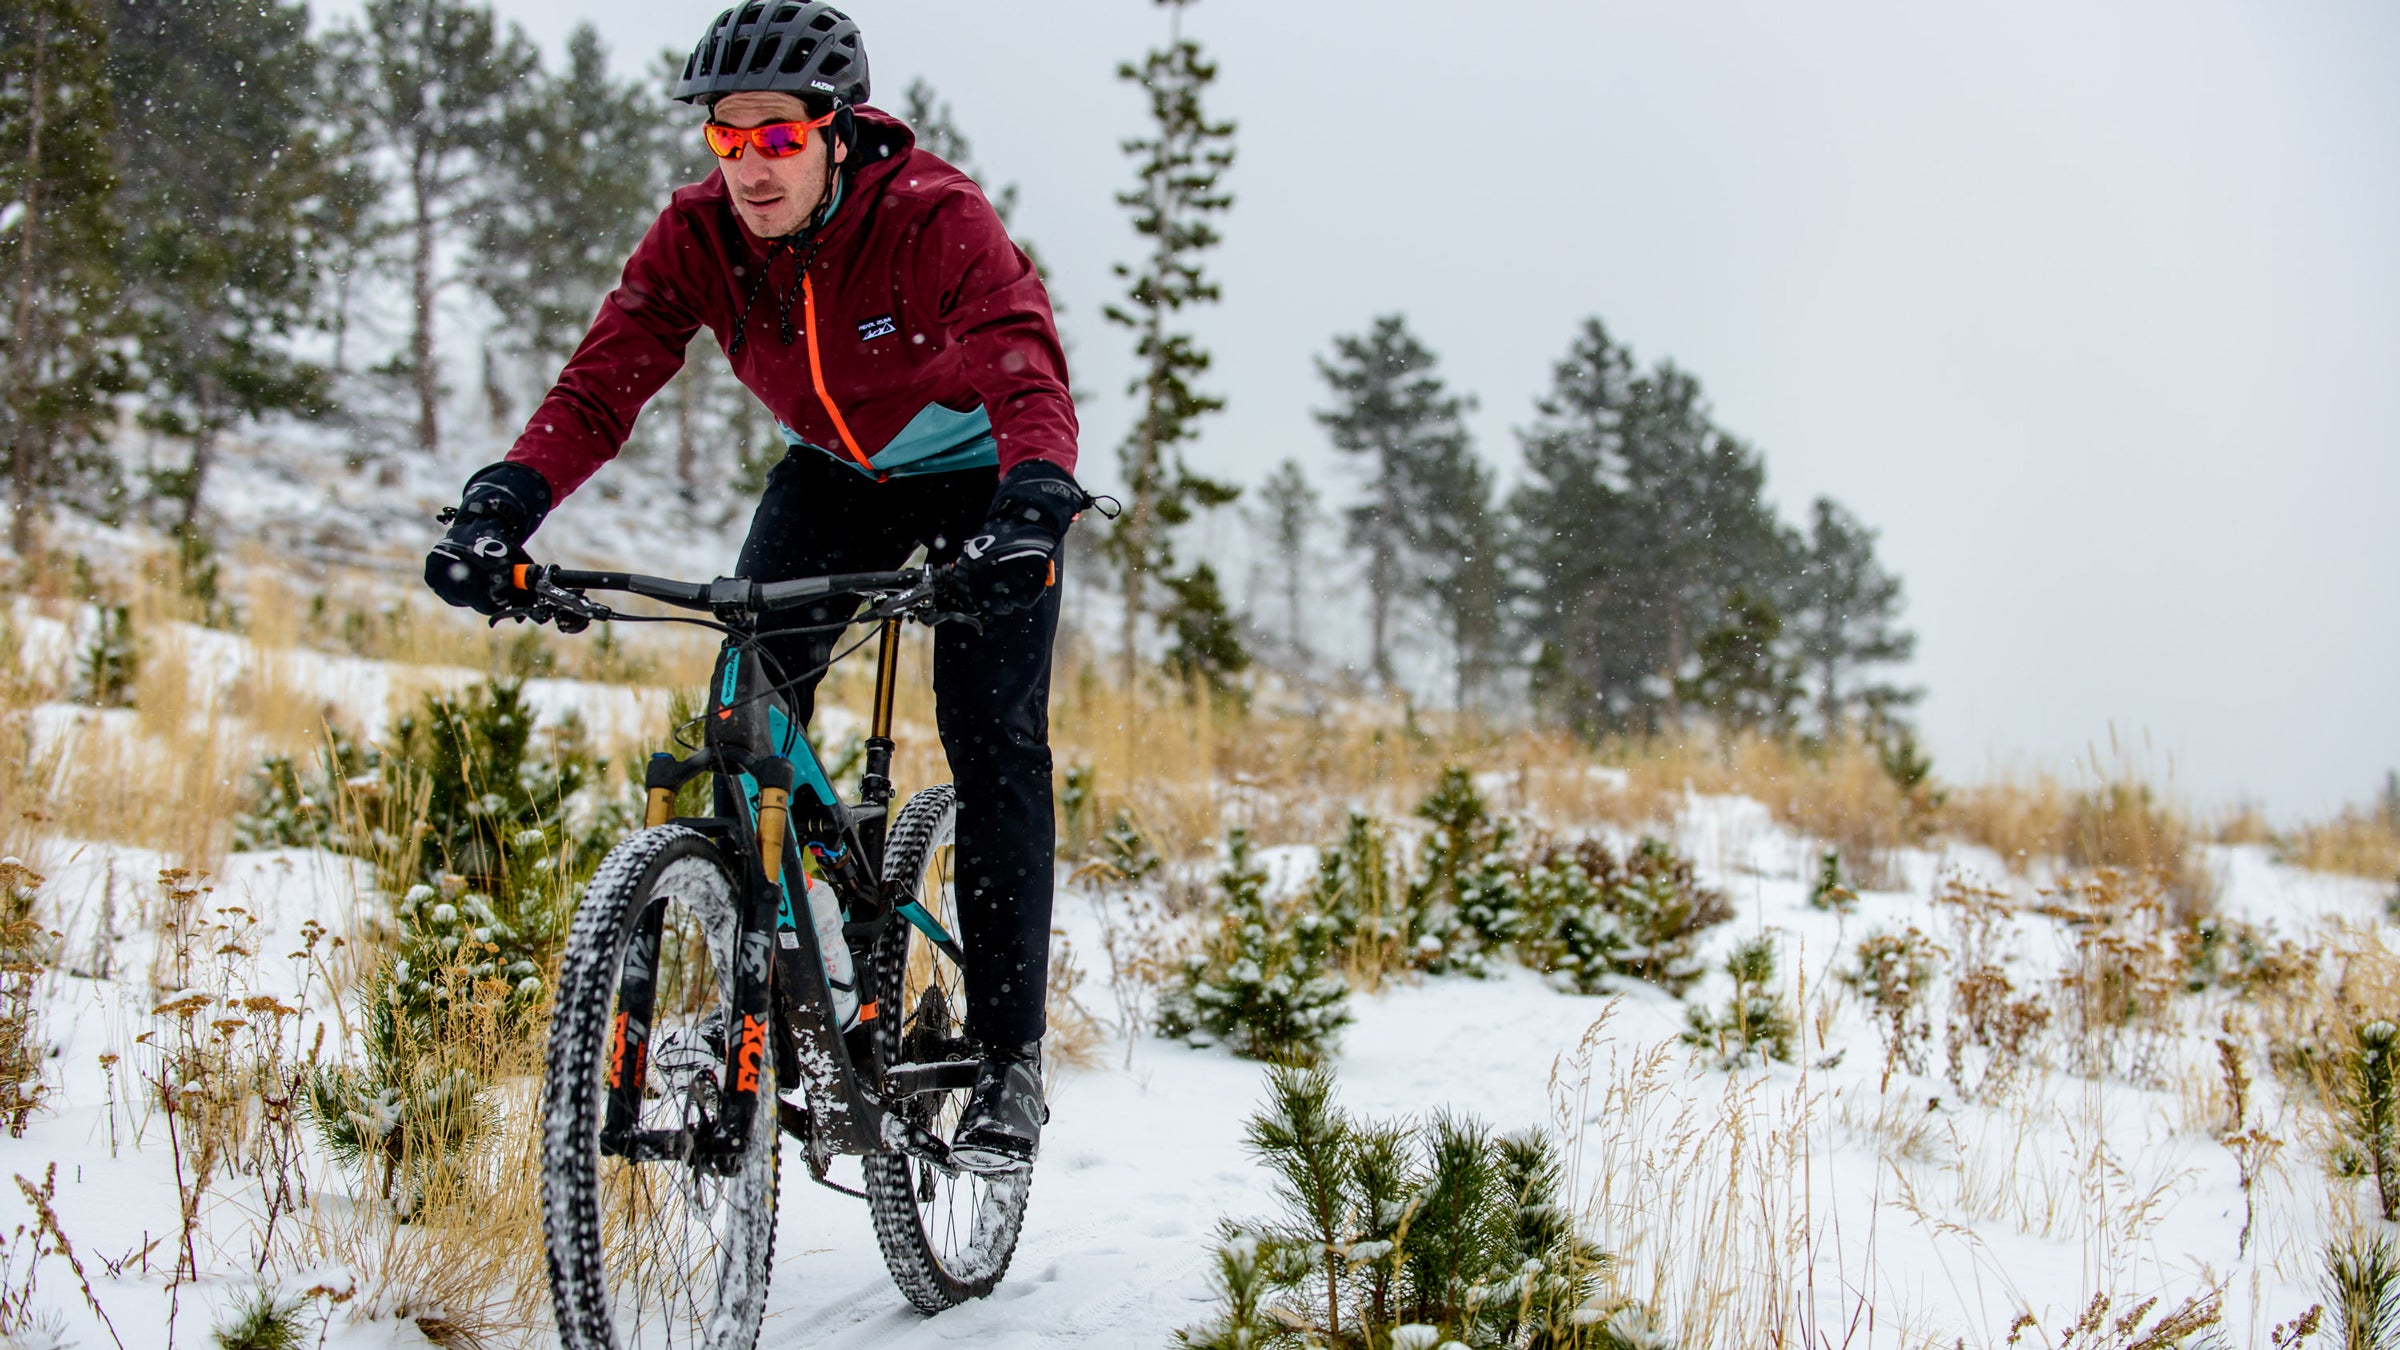 Review: Chromag fall and cold weather gear - Canadian Cycling Magazine